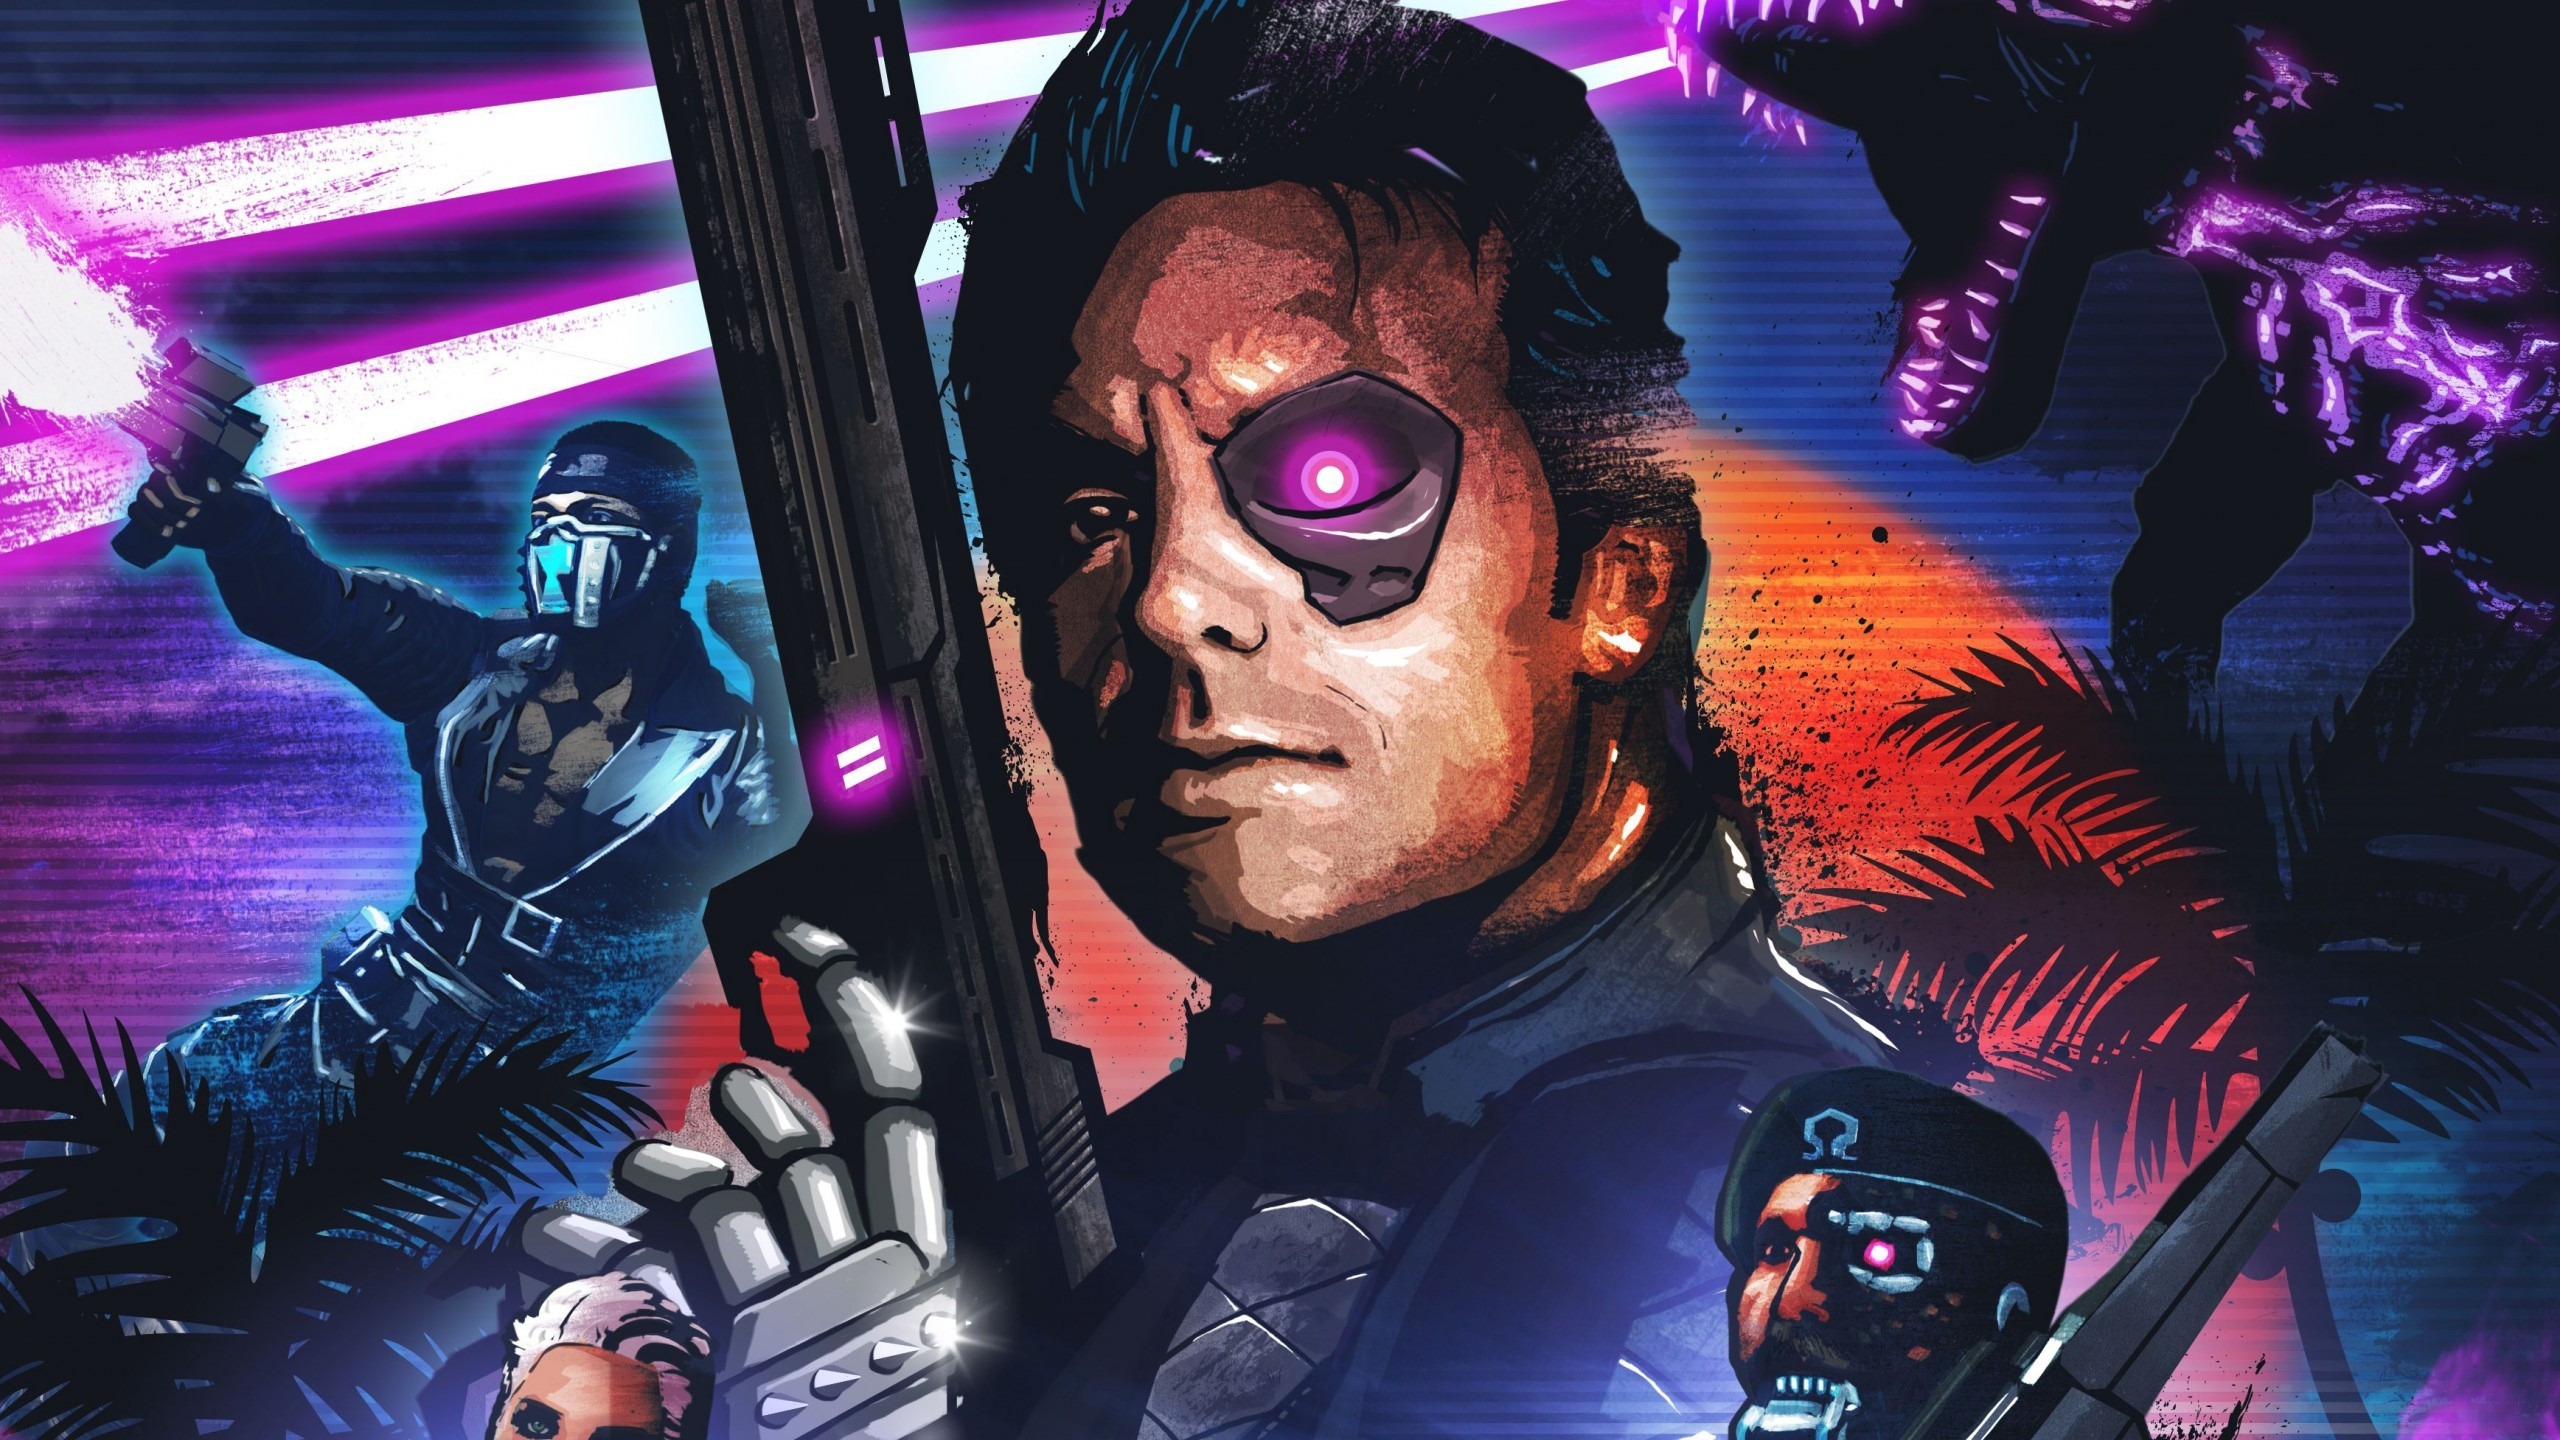 Far Cry 3 Blood Dragon for 2560x1440 HDTV resolution